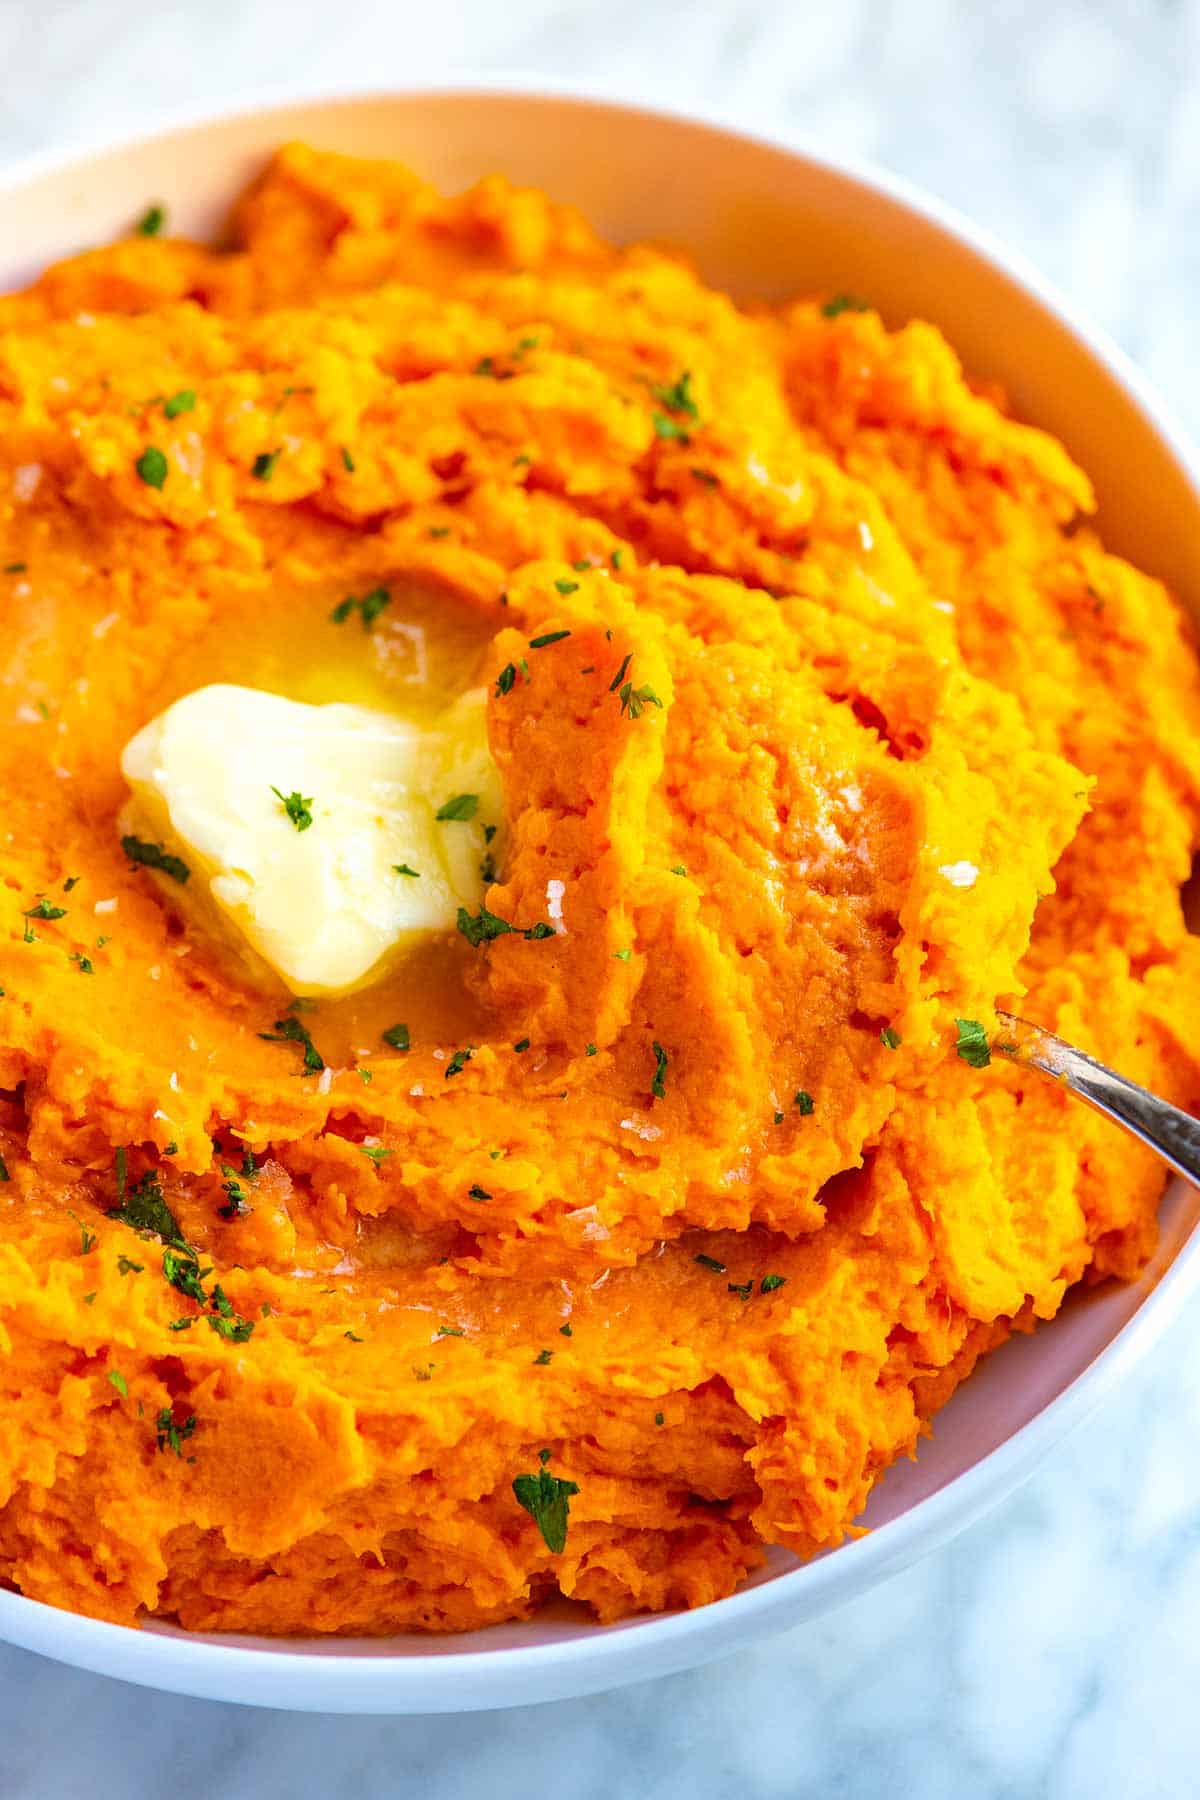 The Best Mashed Sweet Potatoes - Just a Taste